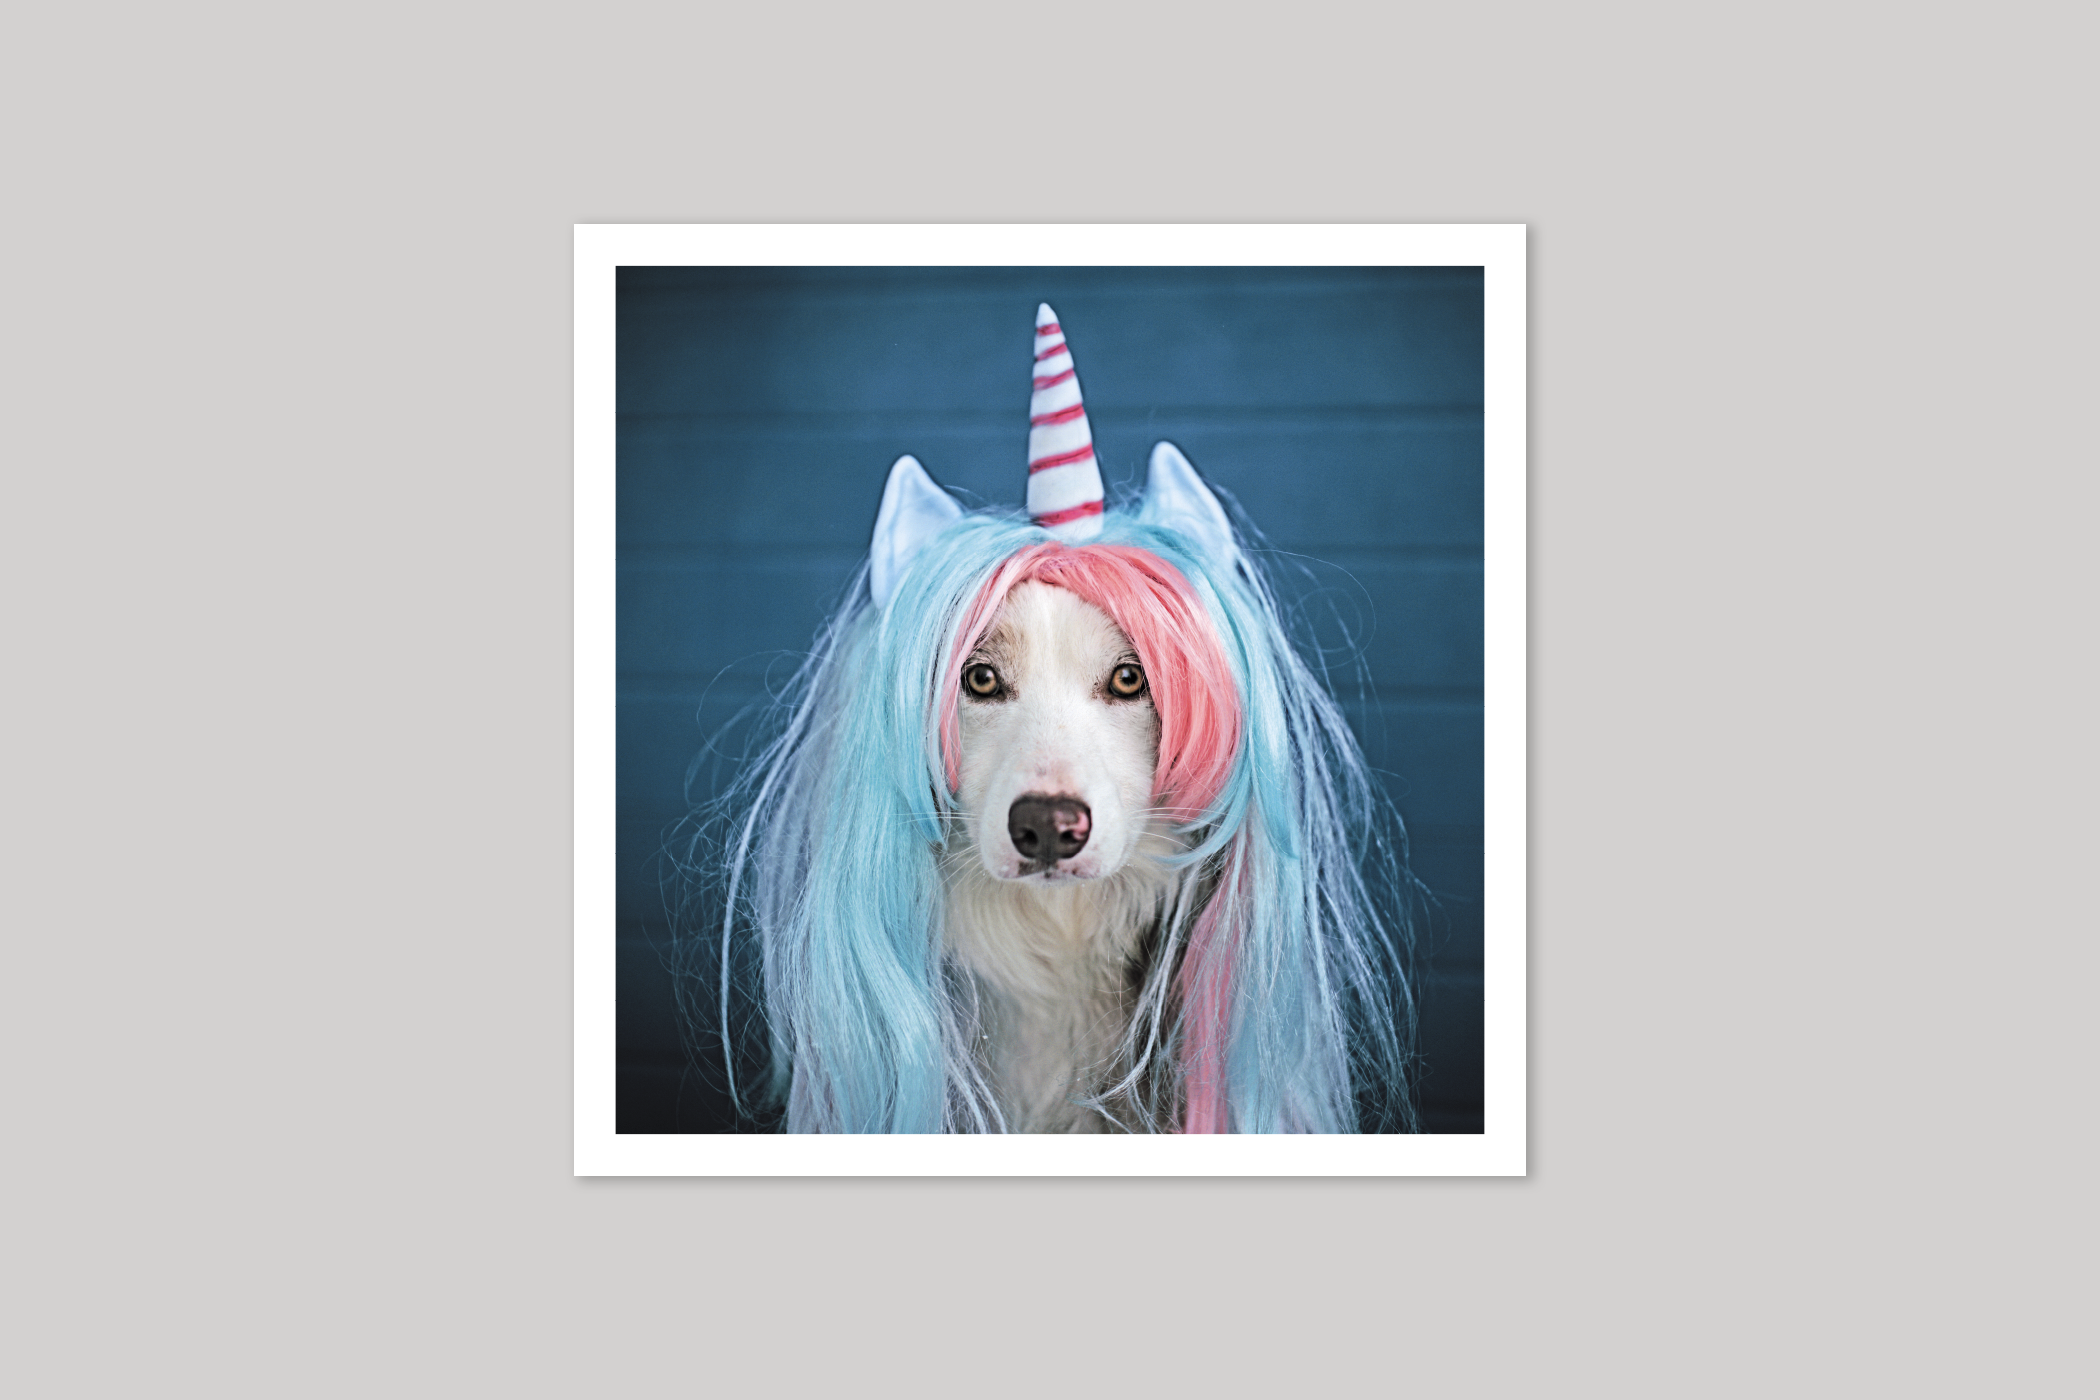 Unicorn cool photography from Wavelength range of photographic cards by Icon.